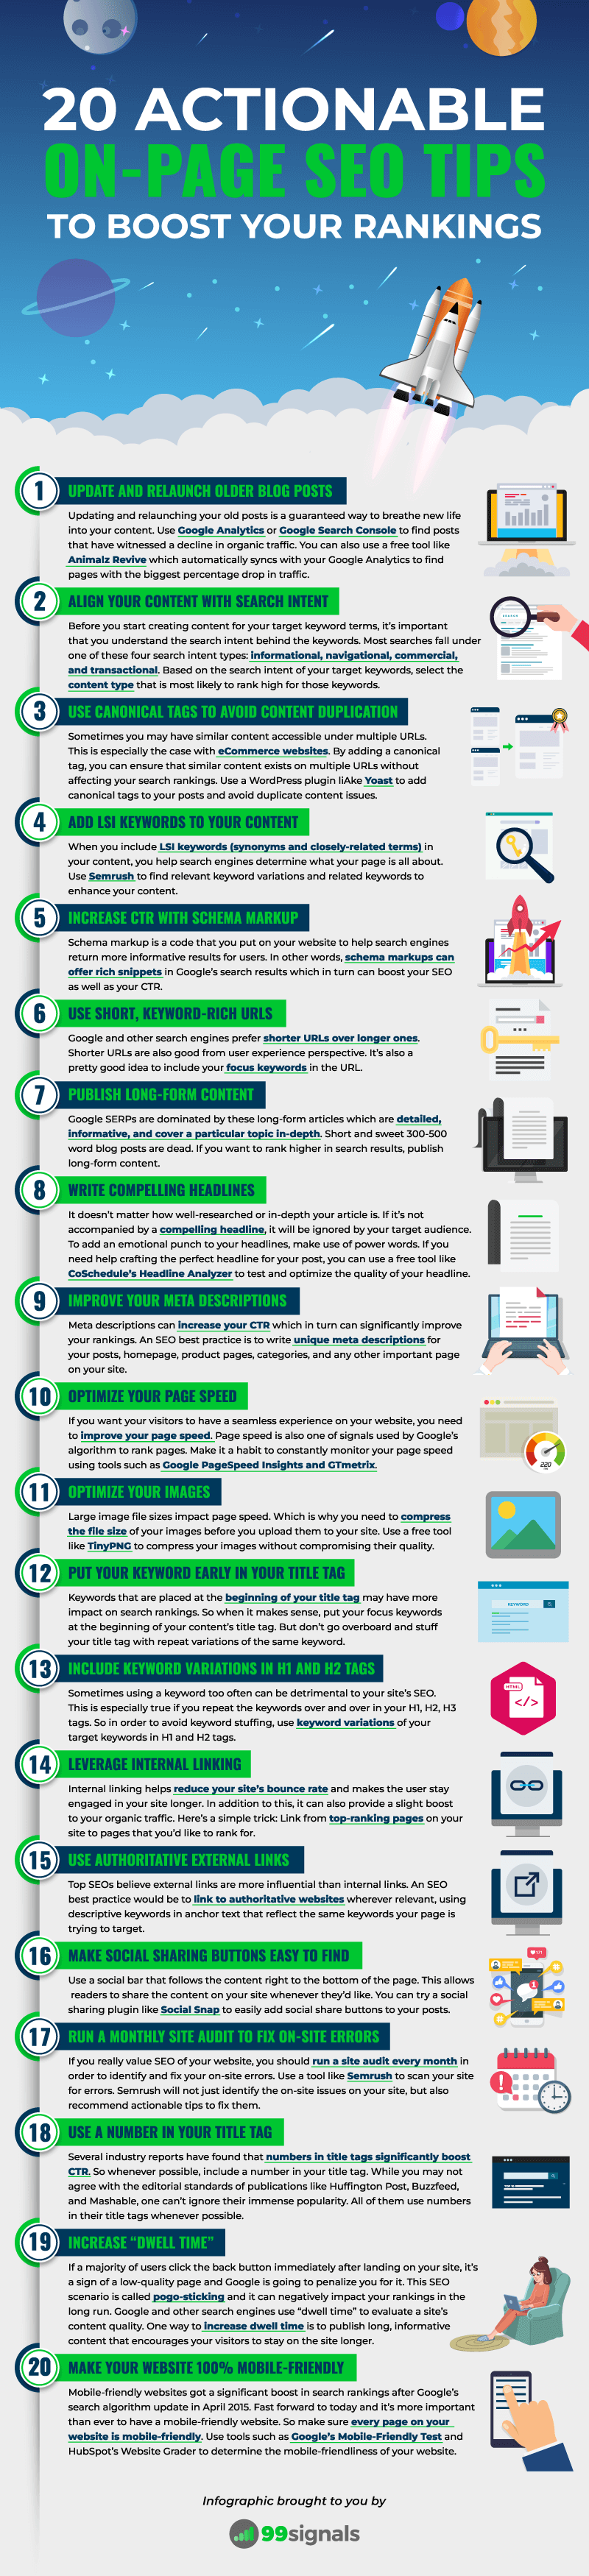 On-Page SEO Tips Infographic by 99signals